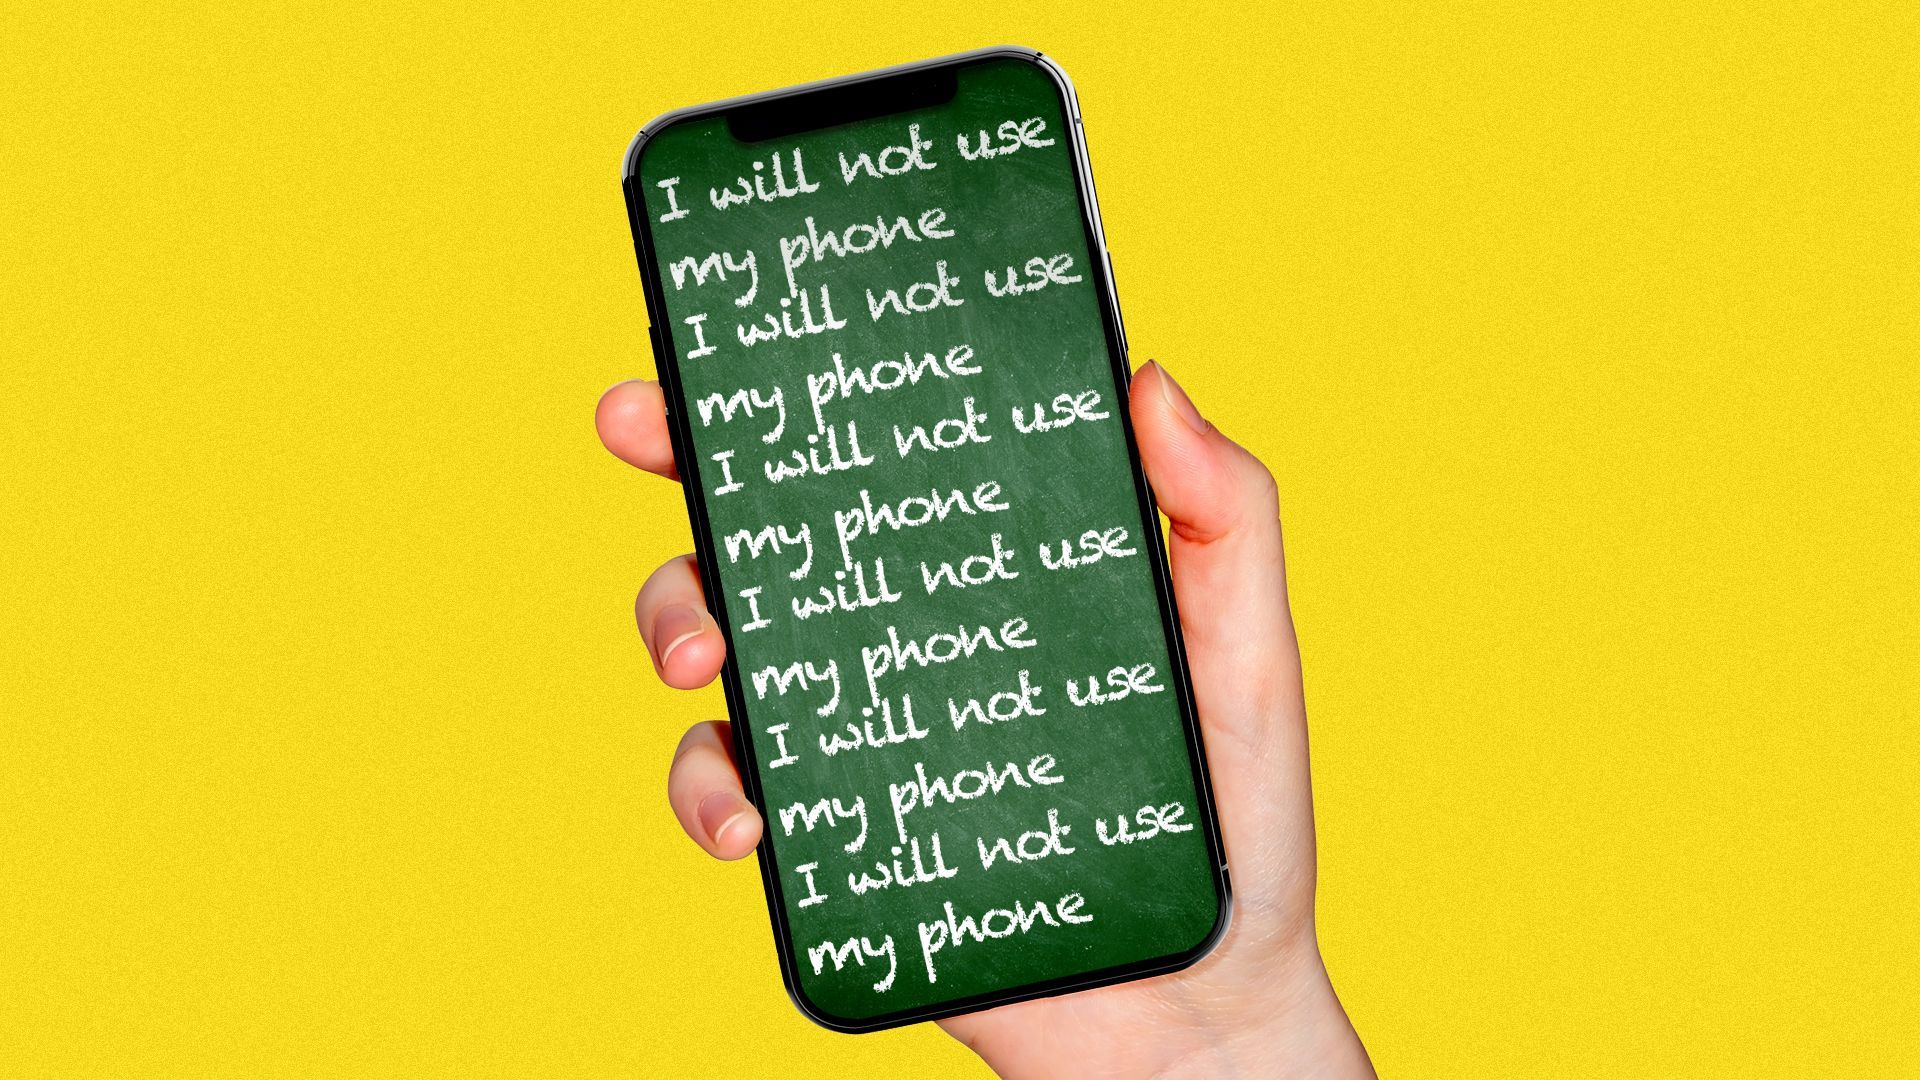 Illustration of a hand holding a phone with a chalkboard screen with the works "I will not use my phone" repeated in chalk across it